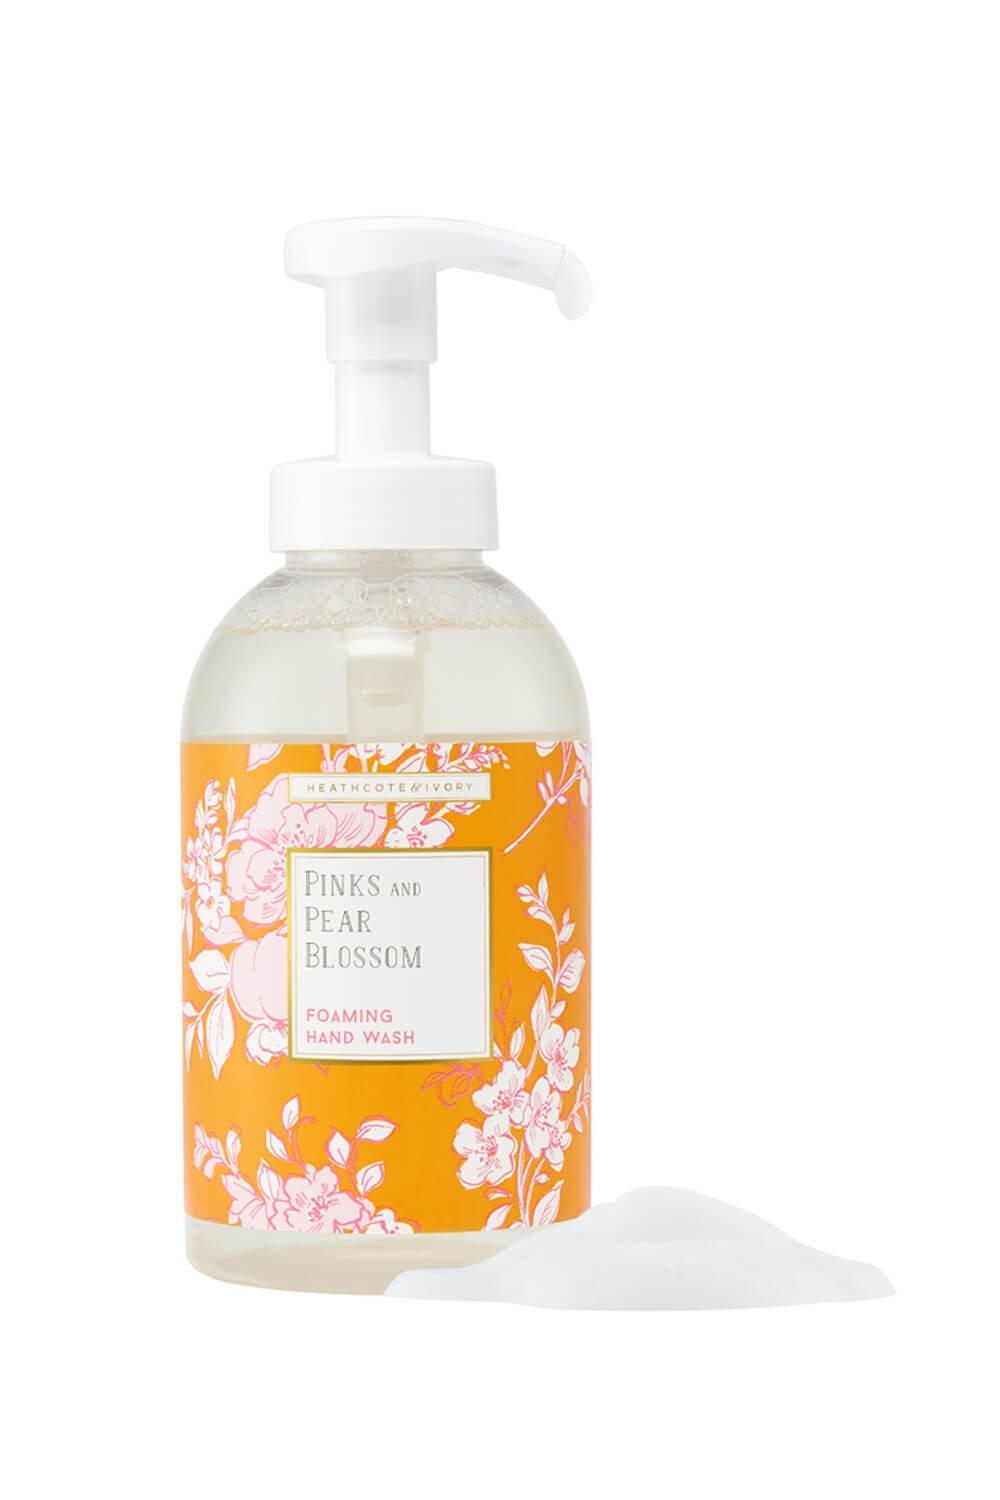  Heathcote & Ivory - Pinks and Pear Blossom Foaming Hand Wash , Image 2 of 2